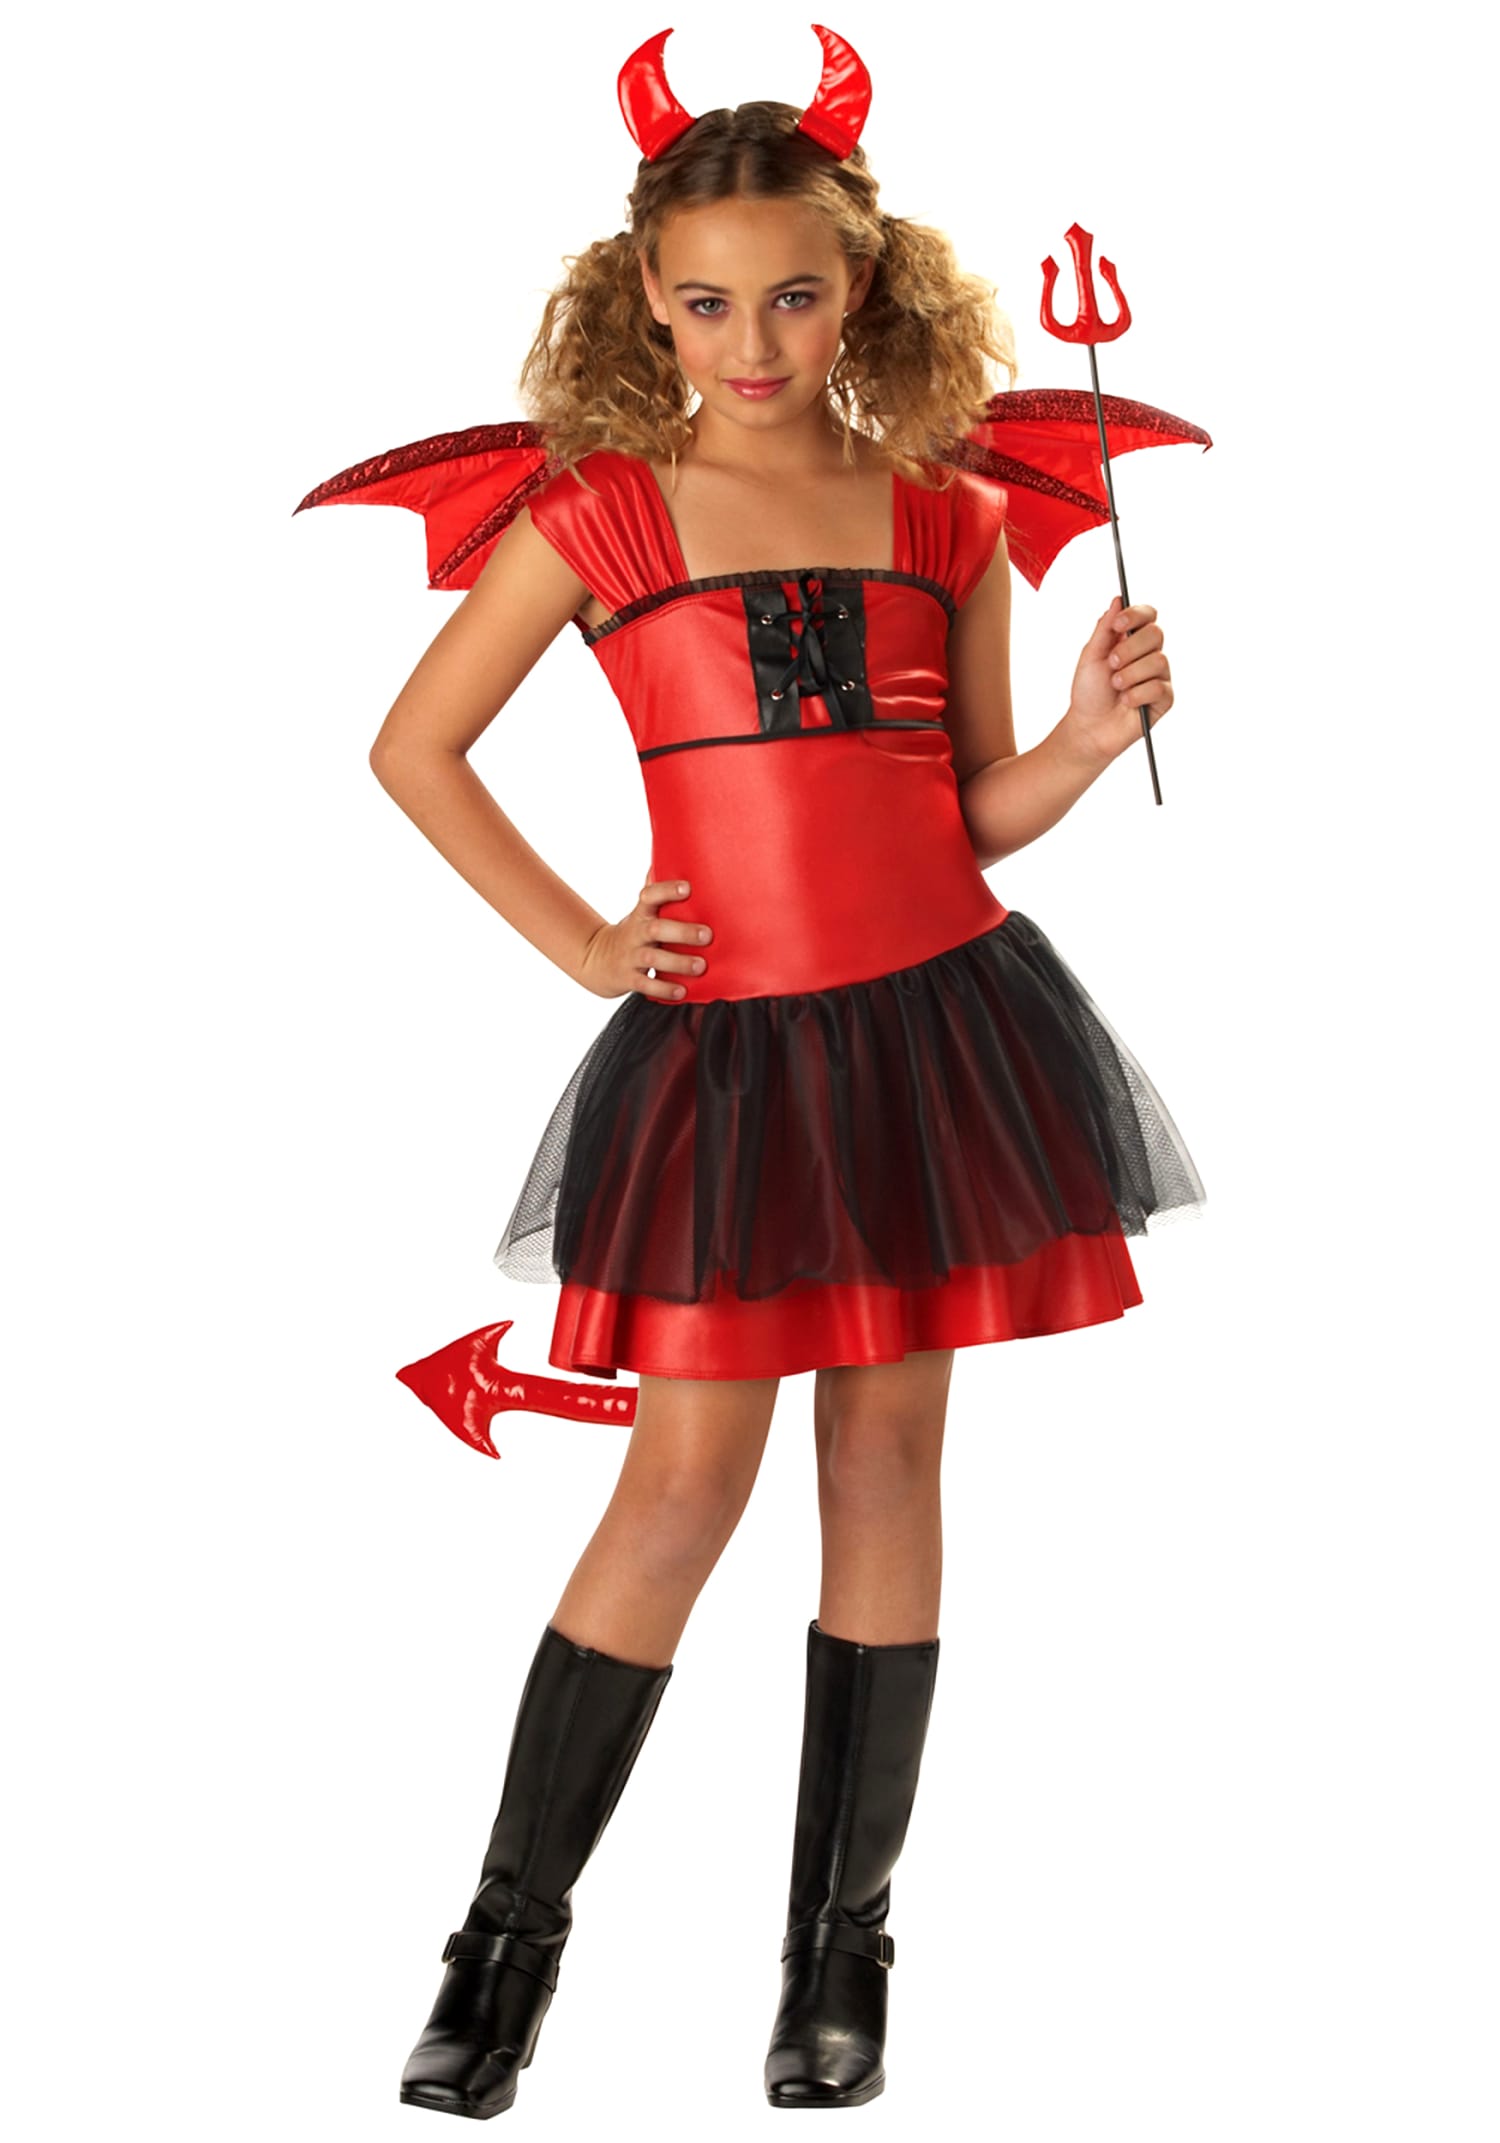 LITTLE DEVIL 14 RG Costumes Devil Girl Costume Horror and Gothic Halloween Cost...